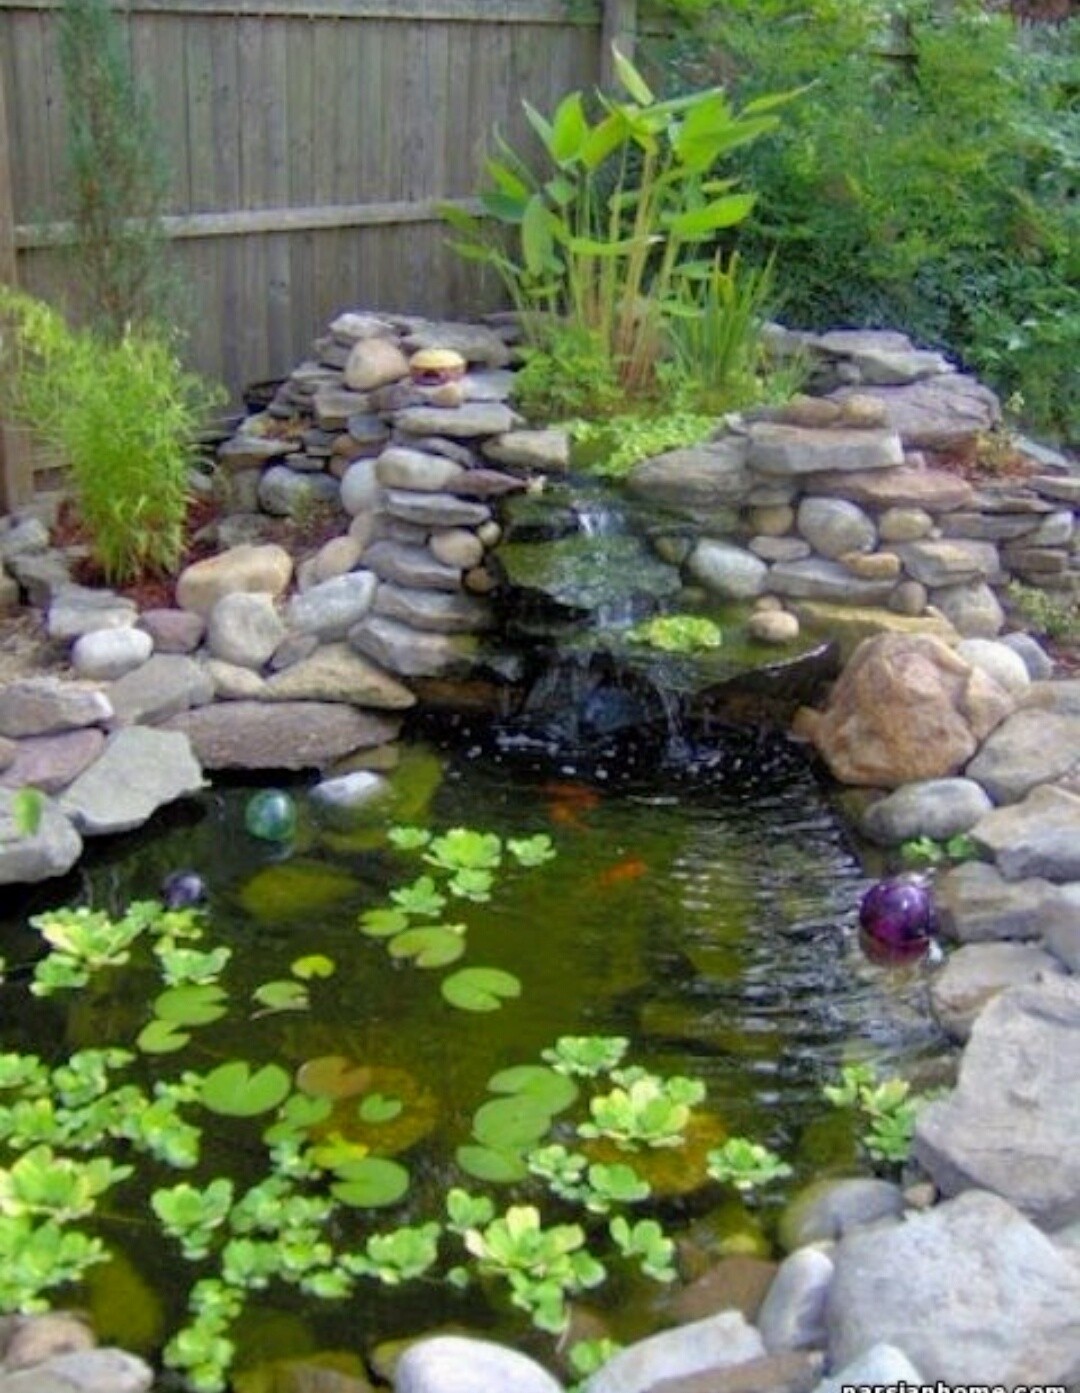 Would love to have a water garden someday but chief